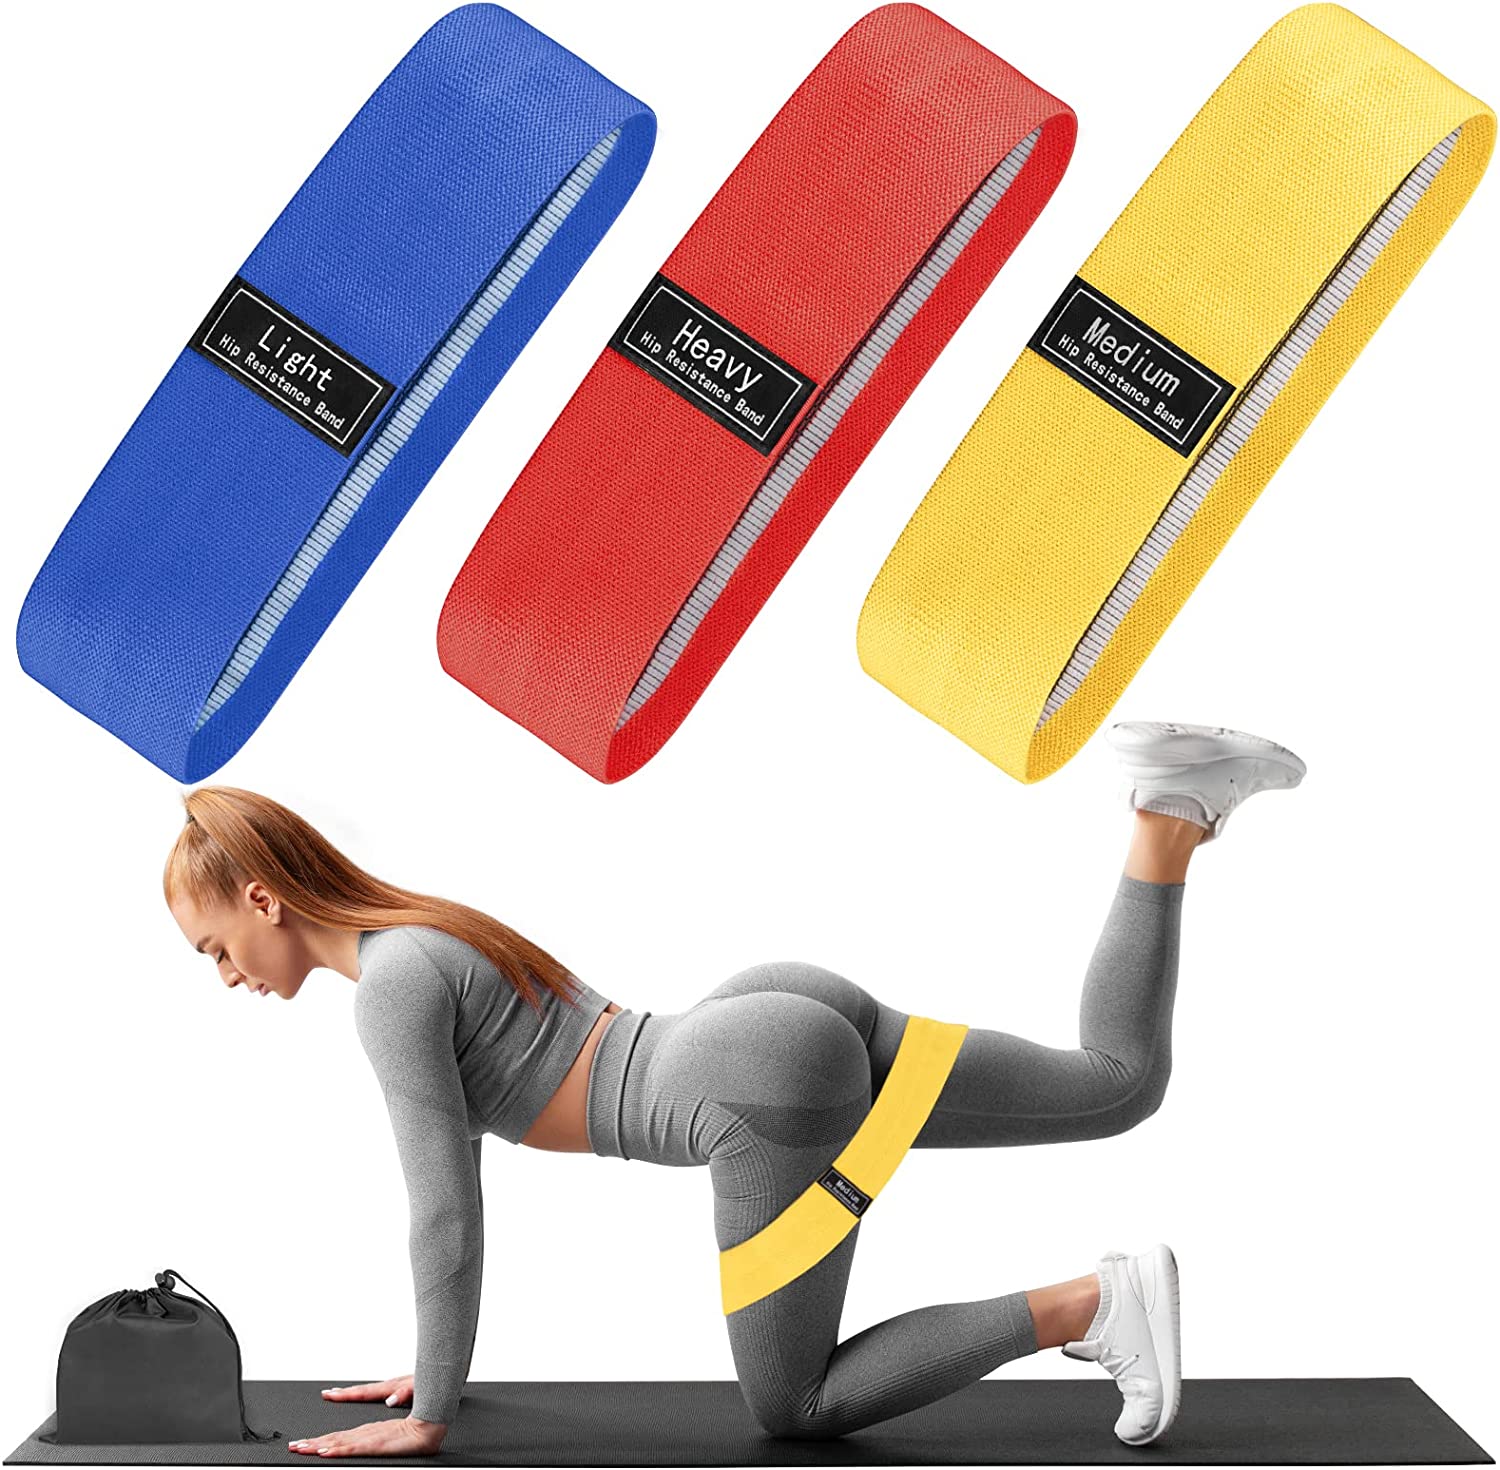 POWAITER Resistance Bands, 3 Packs Fitness Workout Exercise Hip Peach Band